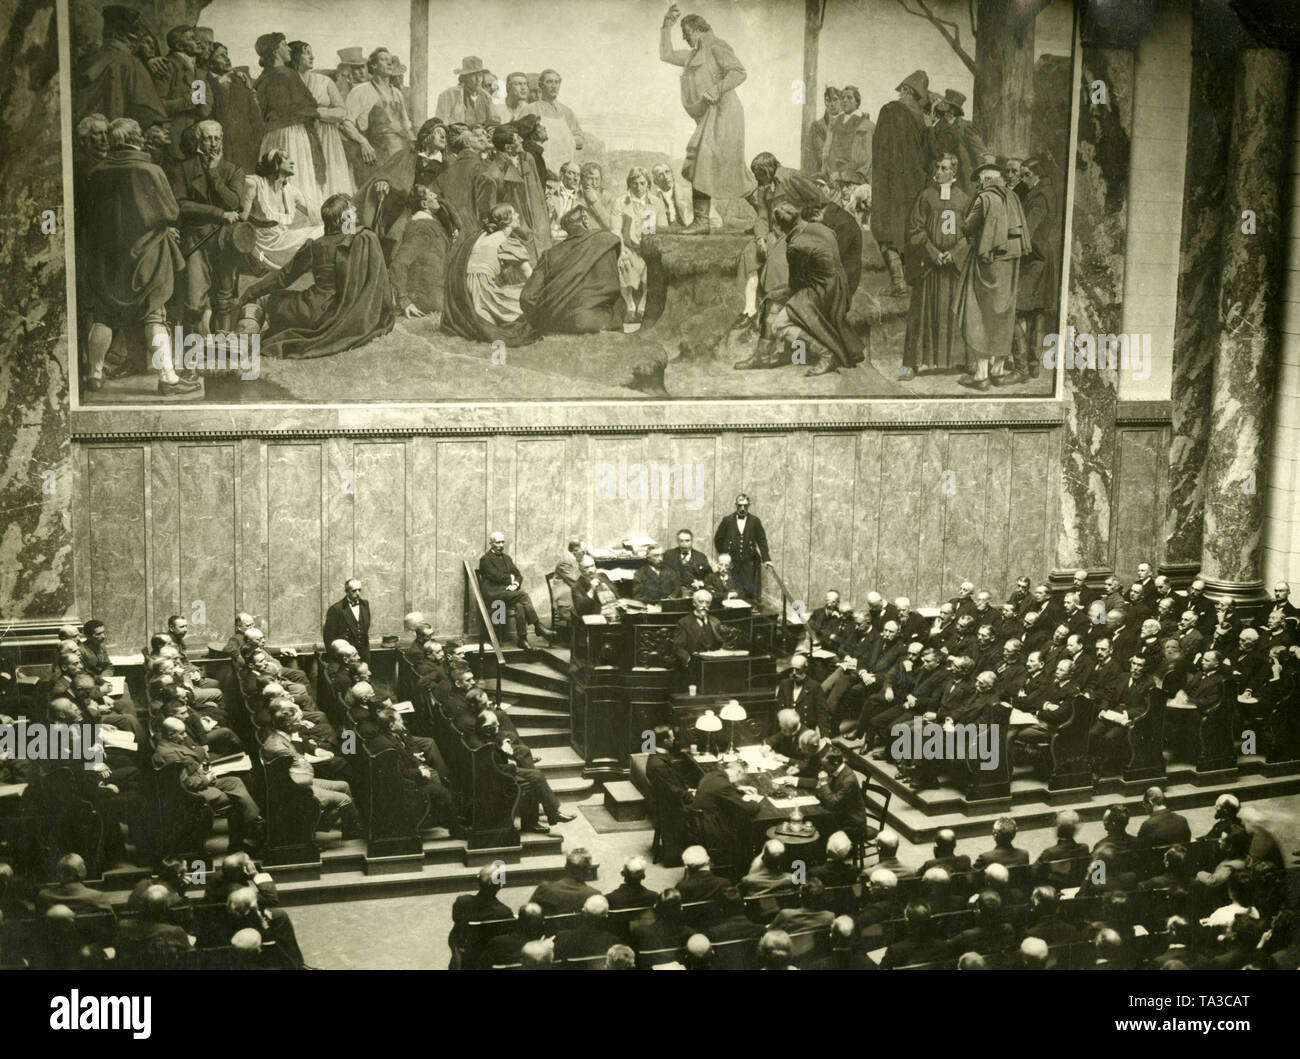 Prime Minister Philipp Heinrich Scheidemann speaks before the National Assembly against the adoption of the Versailles Treaty at a protest meeting in the auditorium of the Berlin National Library. The dispute over the adoption has caused the government to break in two. This dispute lasts until 1933. Stock Photo